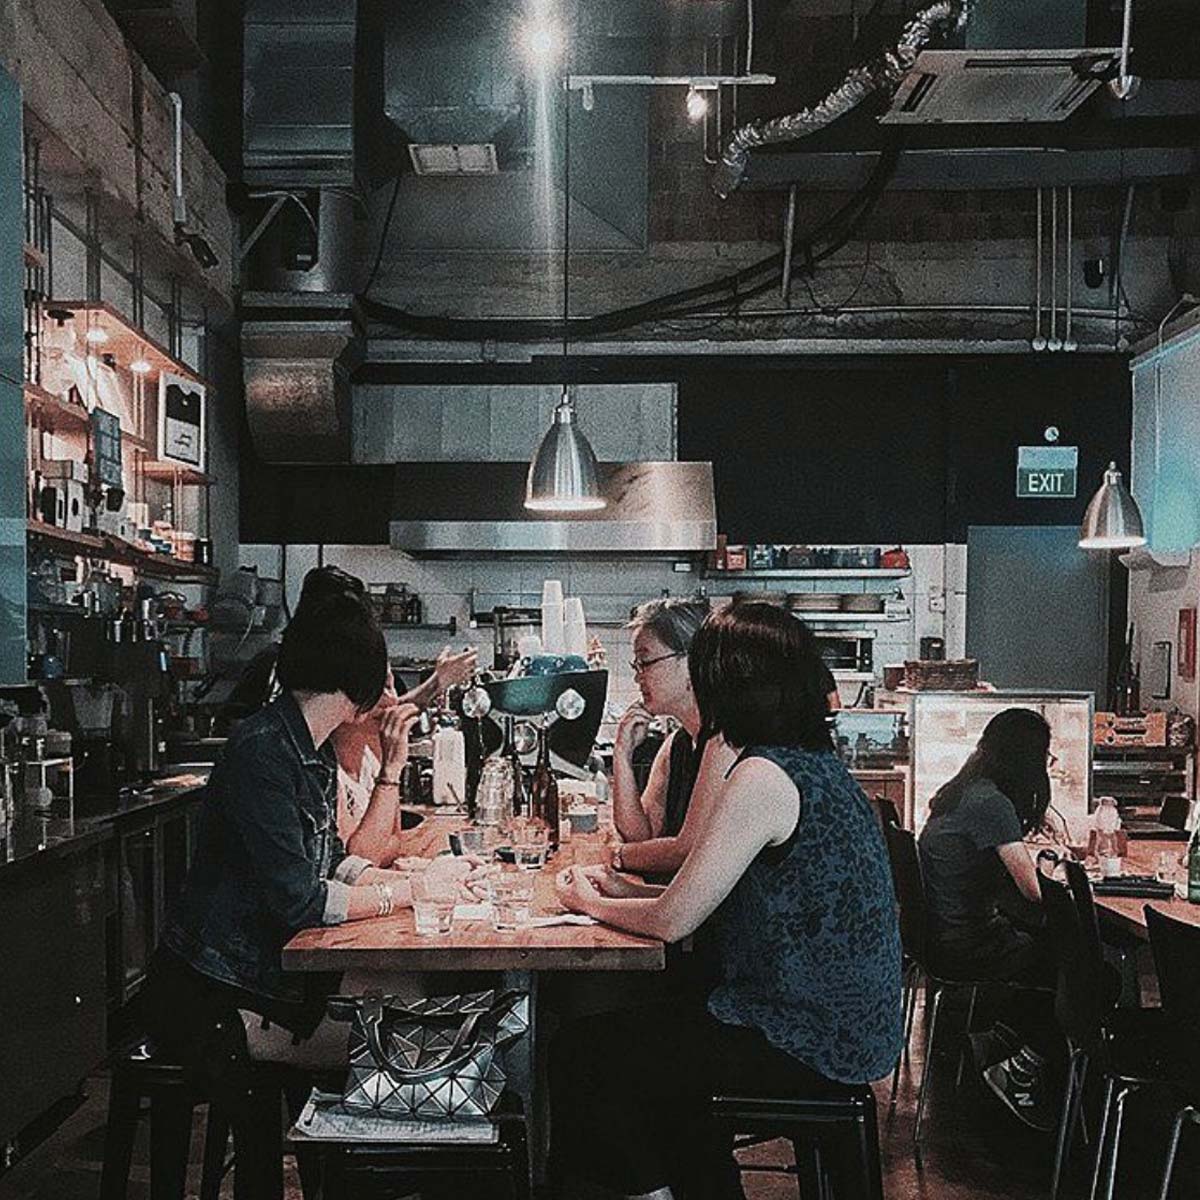 Jimmy Monkey Café – Jimmy Monkey Café is arguably Singapore's hippest coffee destination. Come for the ultimate coffee experience made with the Slayer.